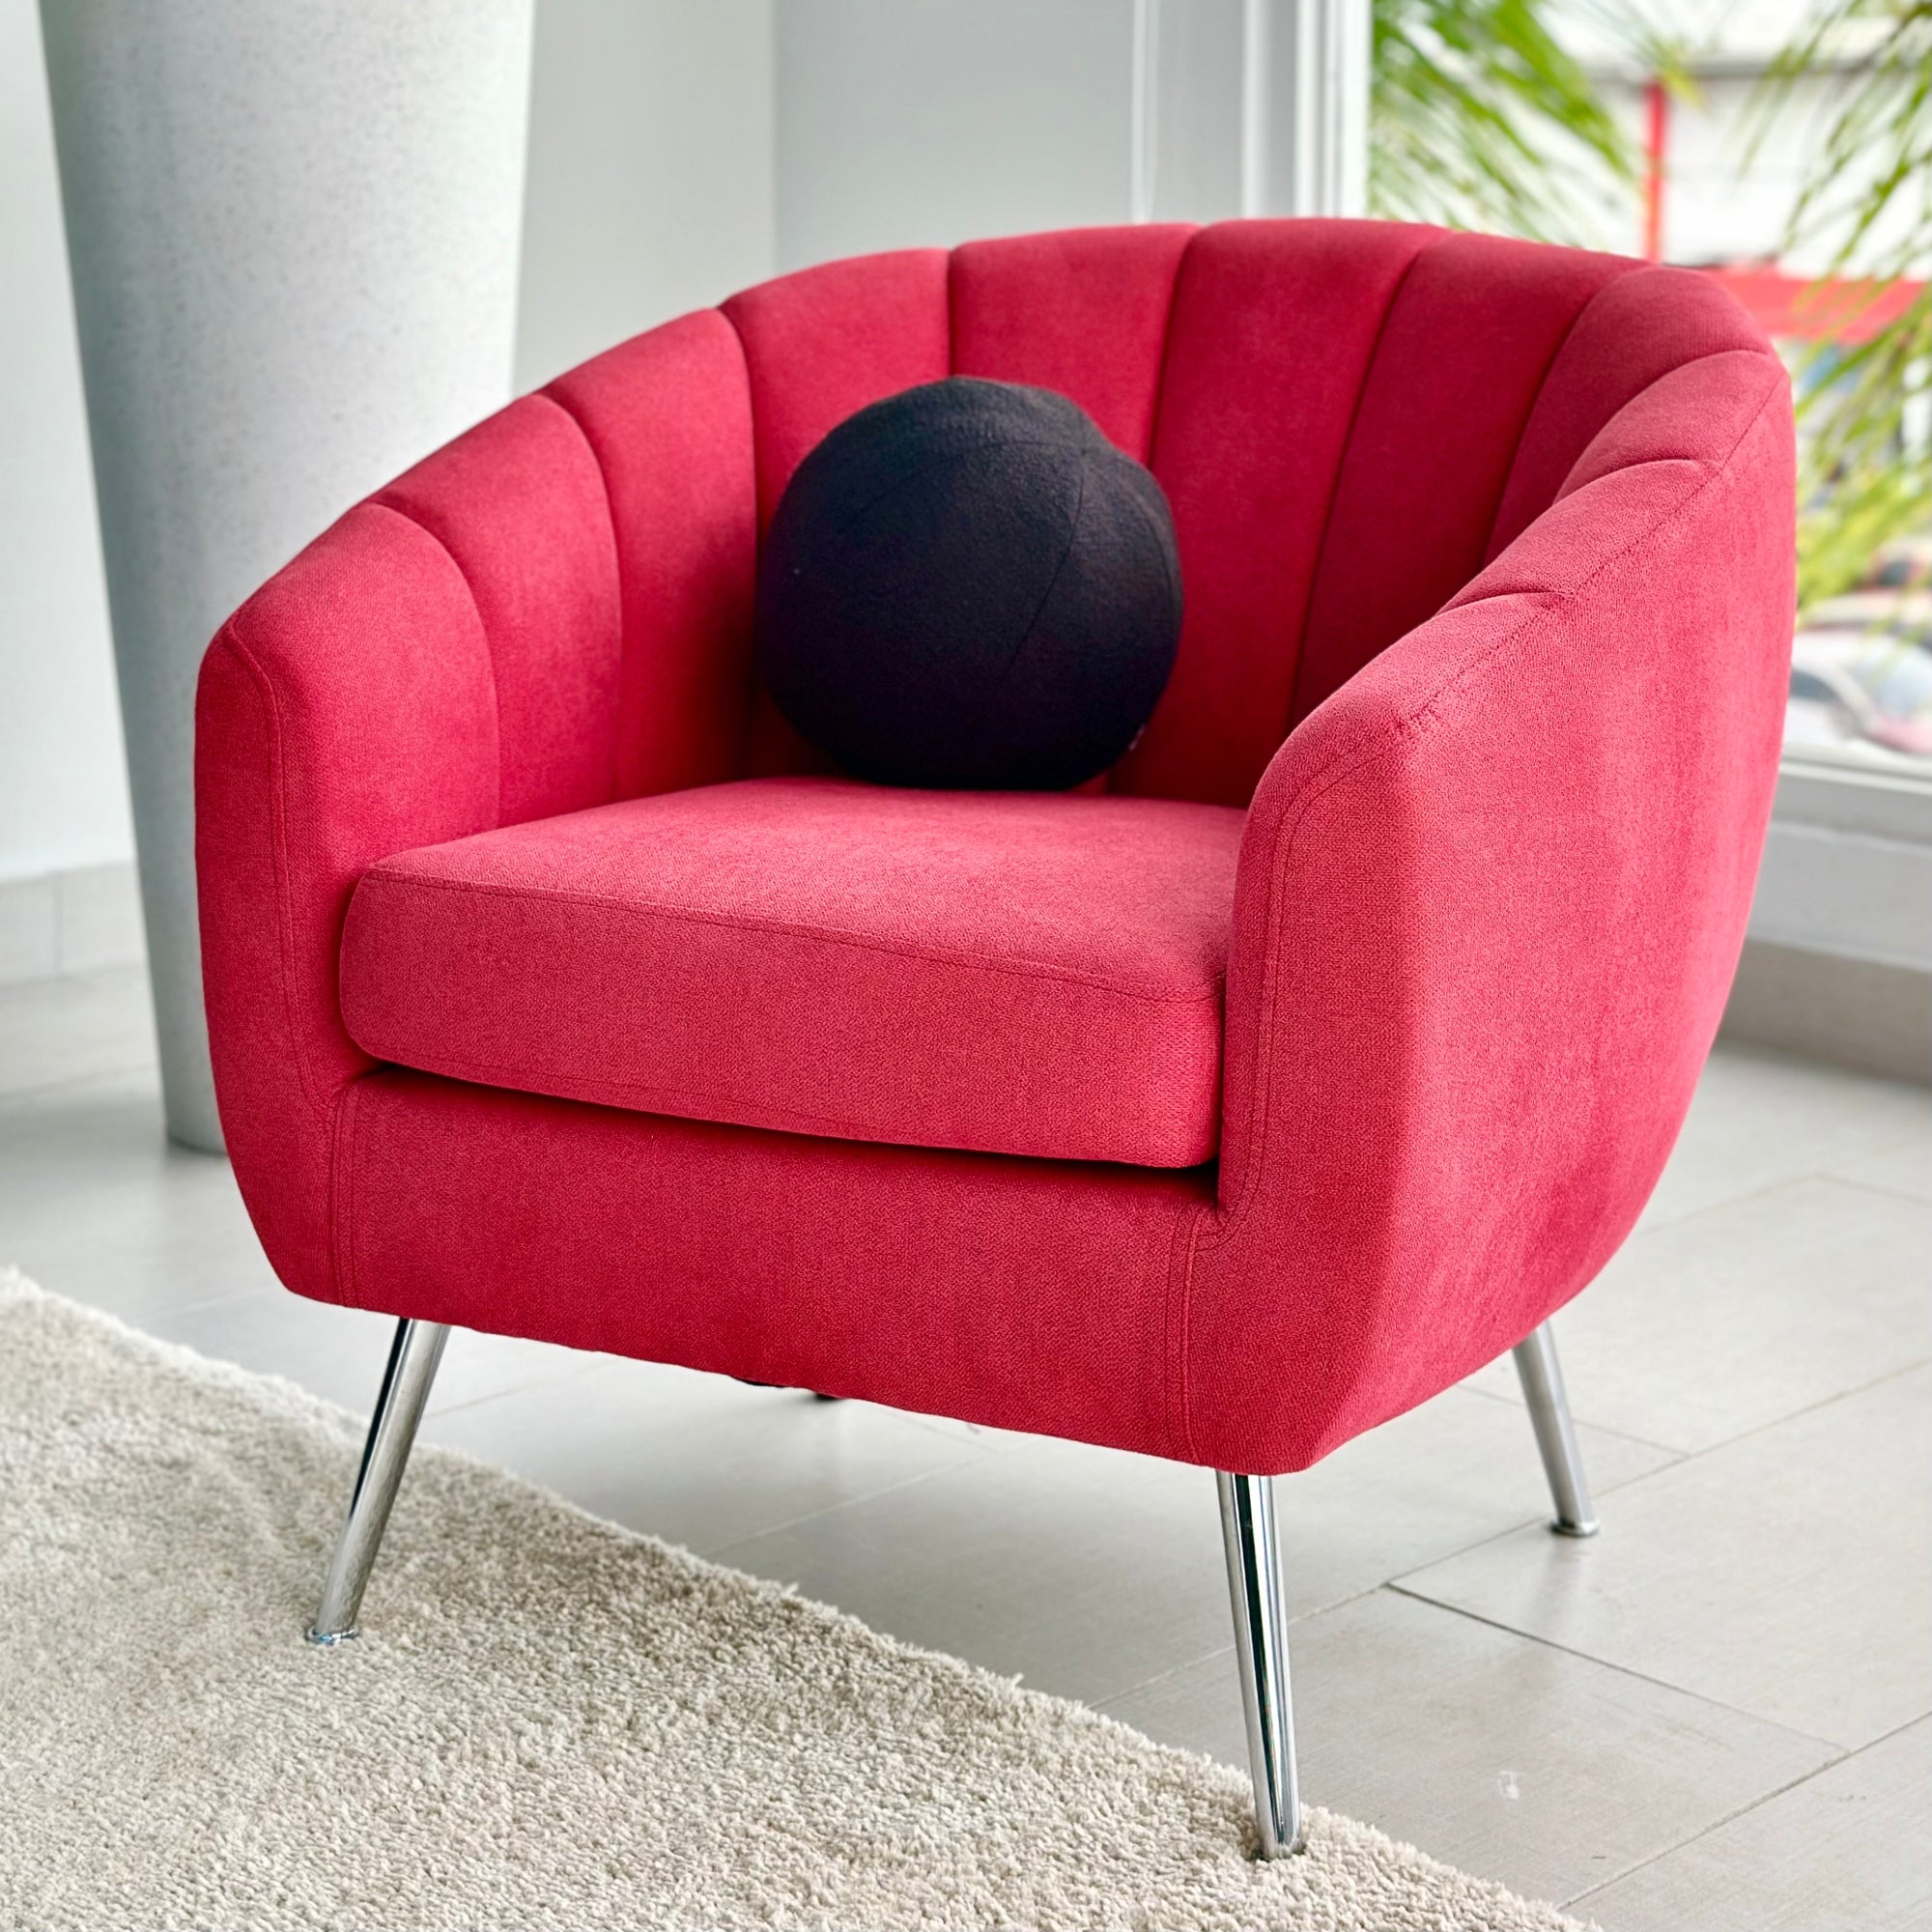 Arch Red Fabric Chair Silver Legs